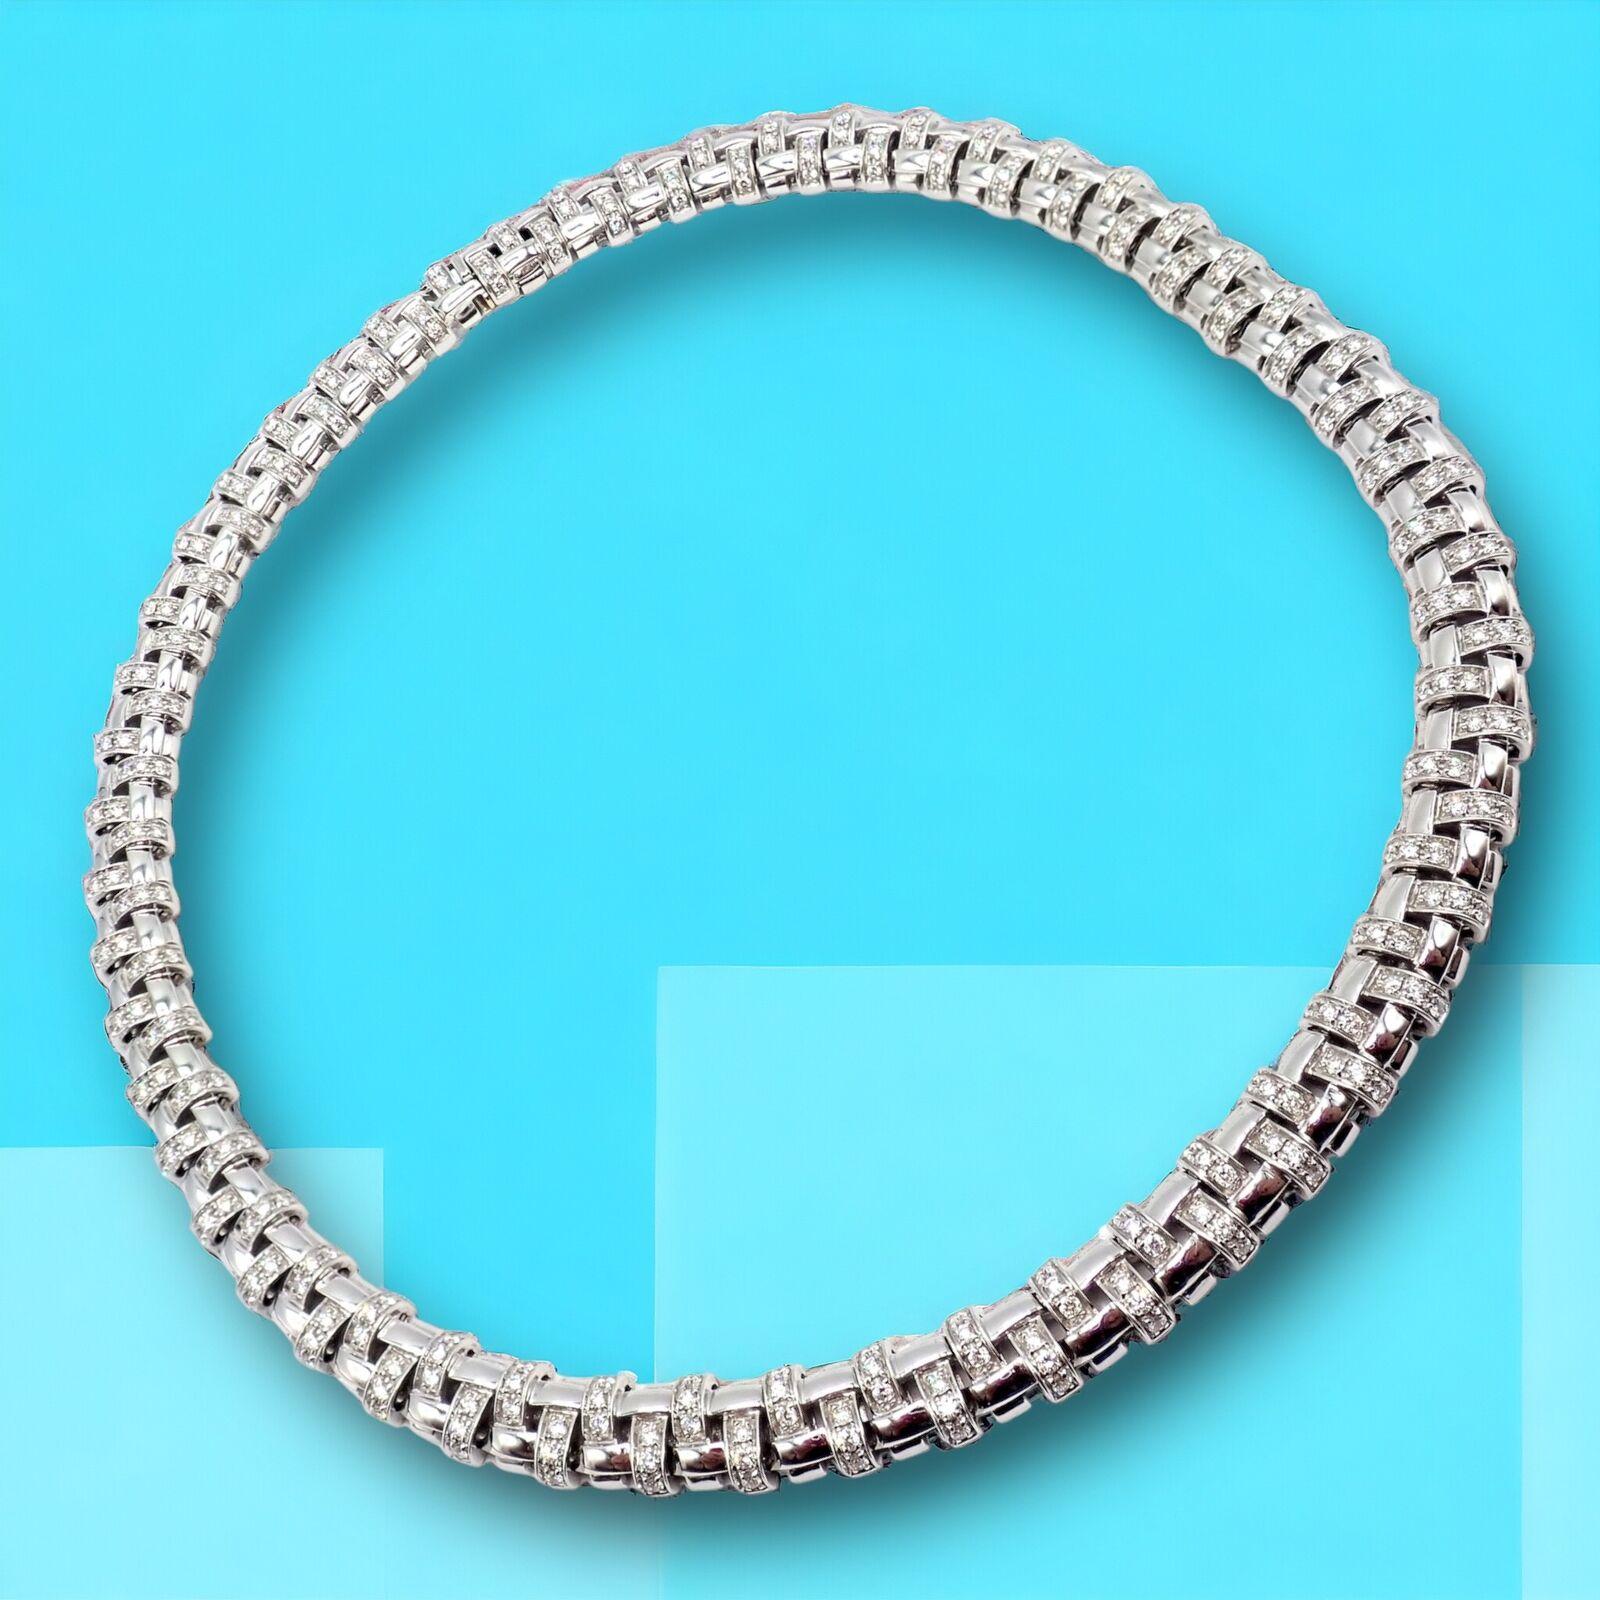 18k White Gold Vannerie Basket Weave Diamond Choker Necklace by Tiffany & Co.
This authentic Tiffany & Co. Vannerie necklace is a masterpiece of luxury and intricate design. Crafted from 18k white gold, it showcases a stunning basket weave pattern,